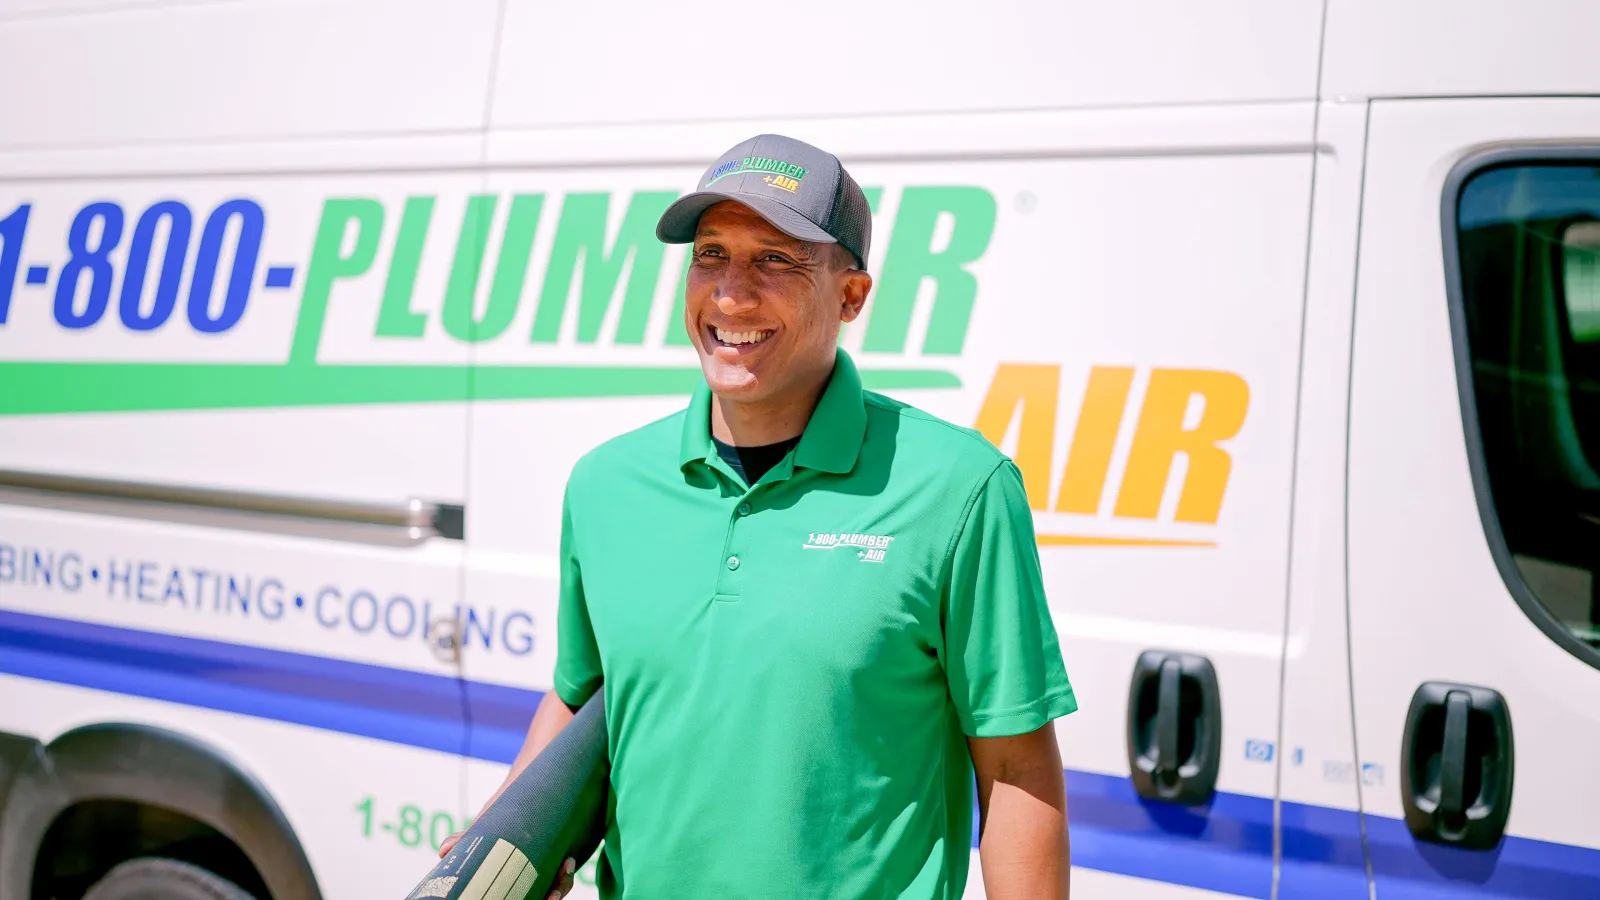 1-800-Plumber +Air of North County San Diego